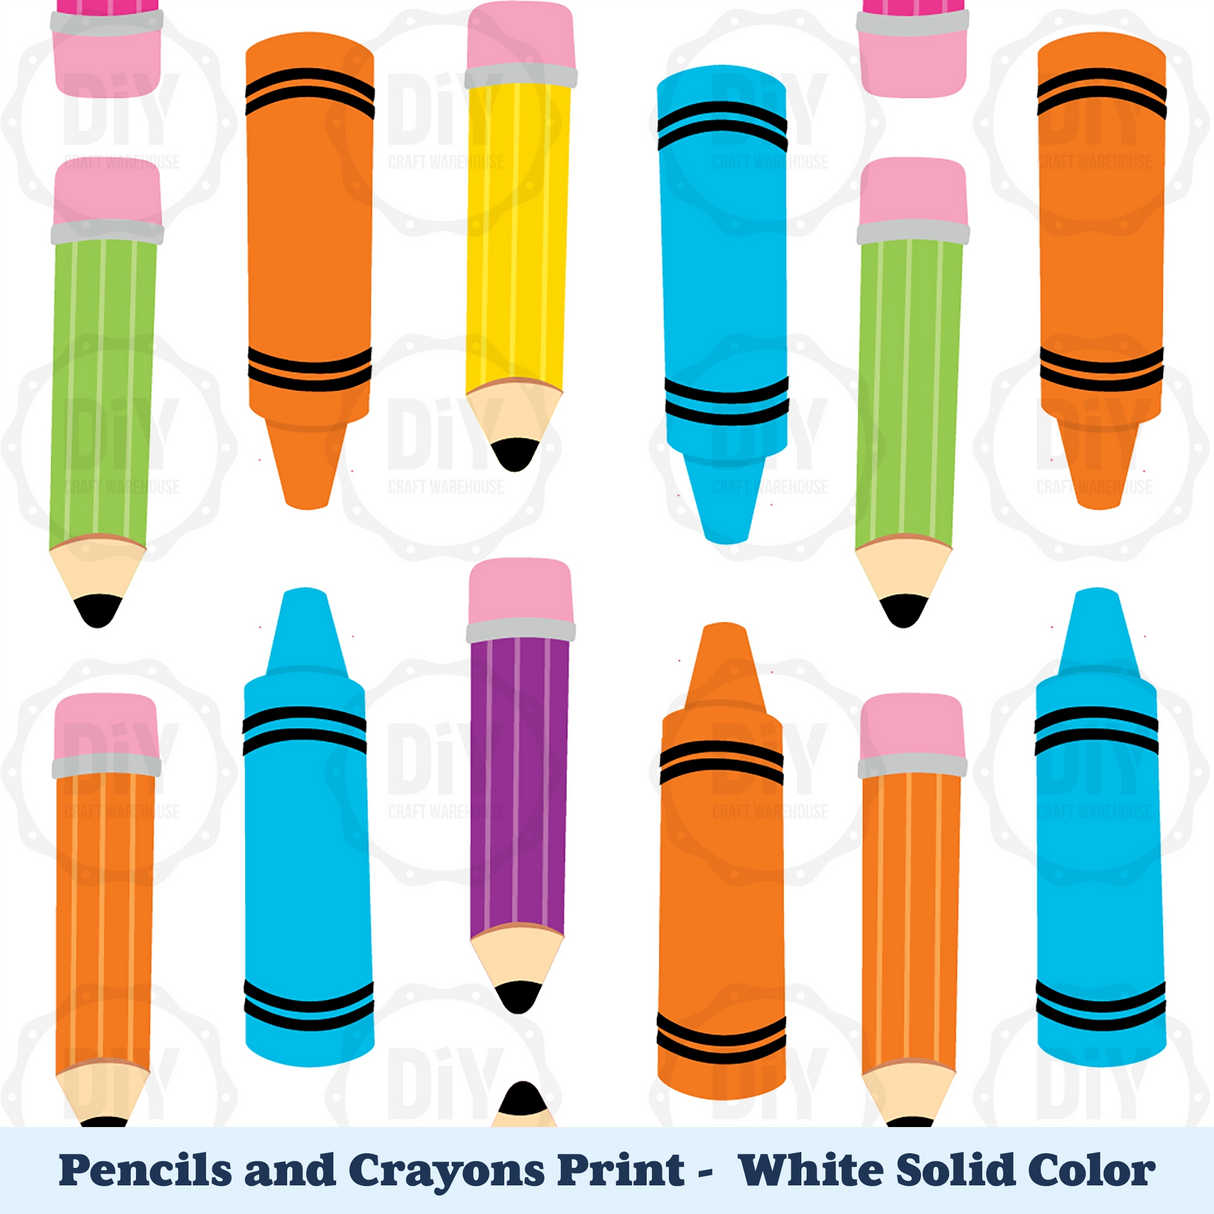 Pencil & Crayons Sublimation Transfer - White Solid